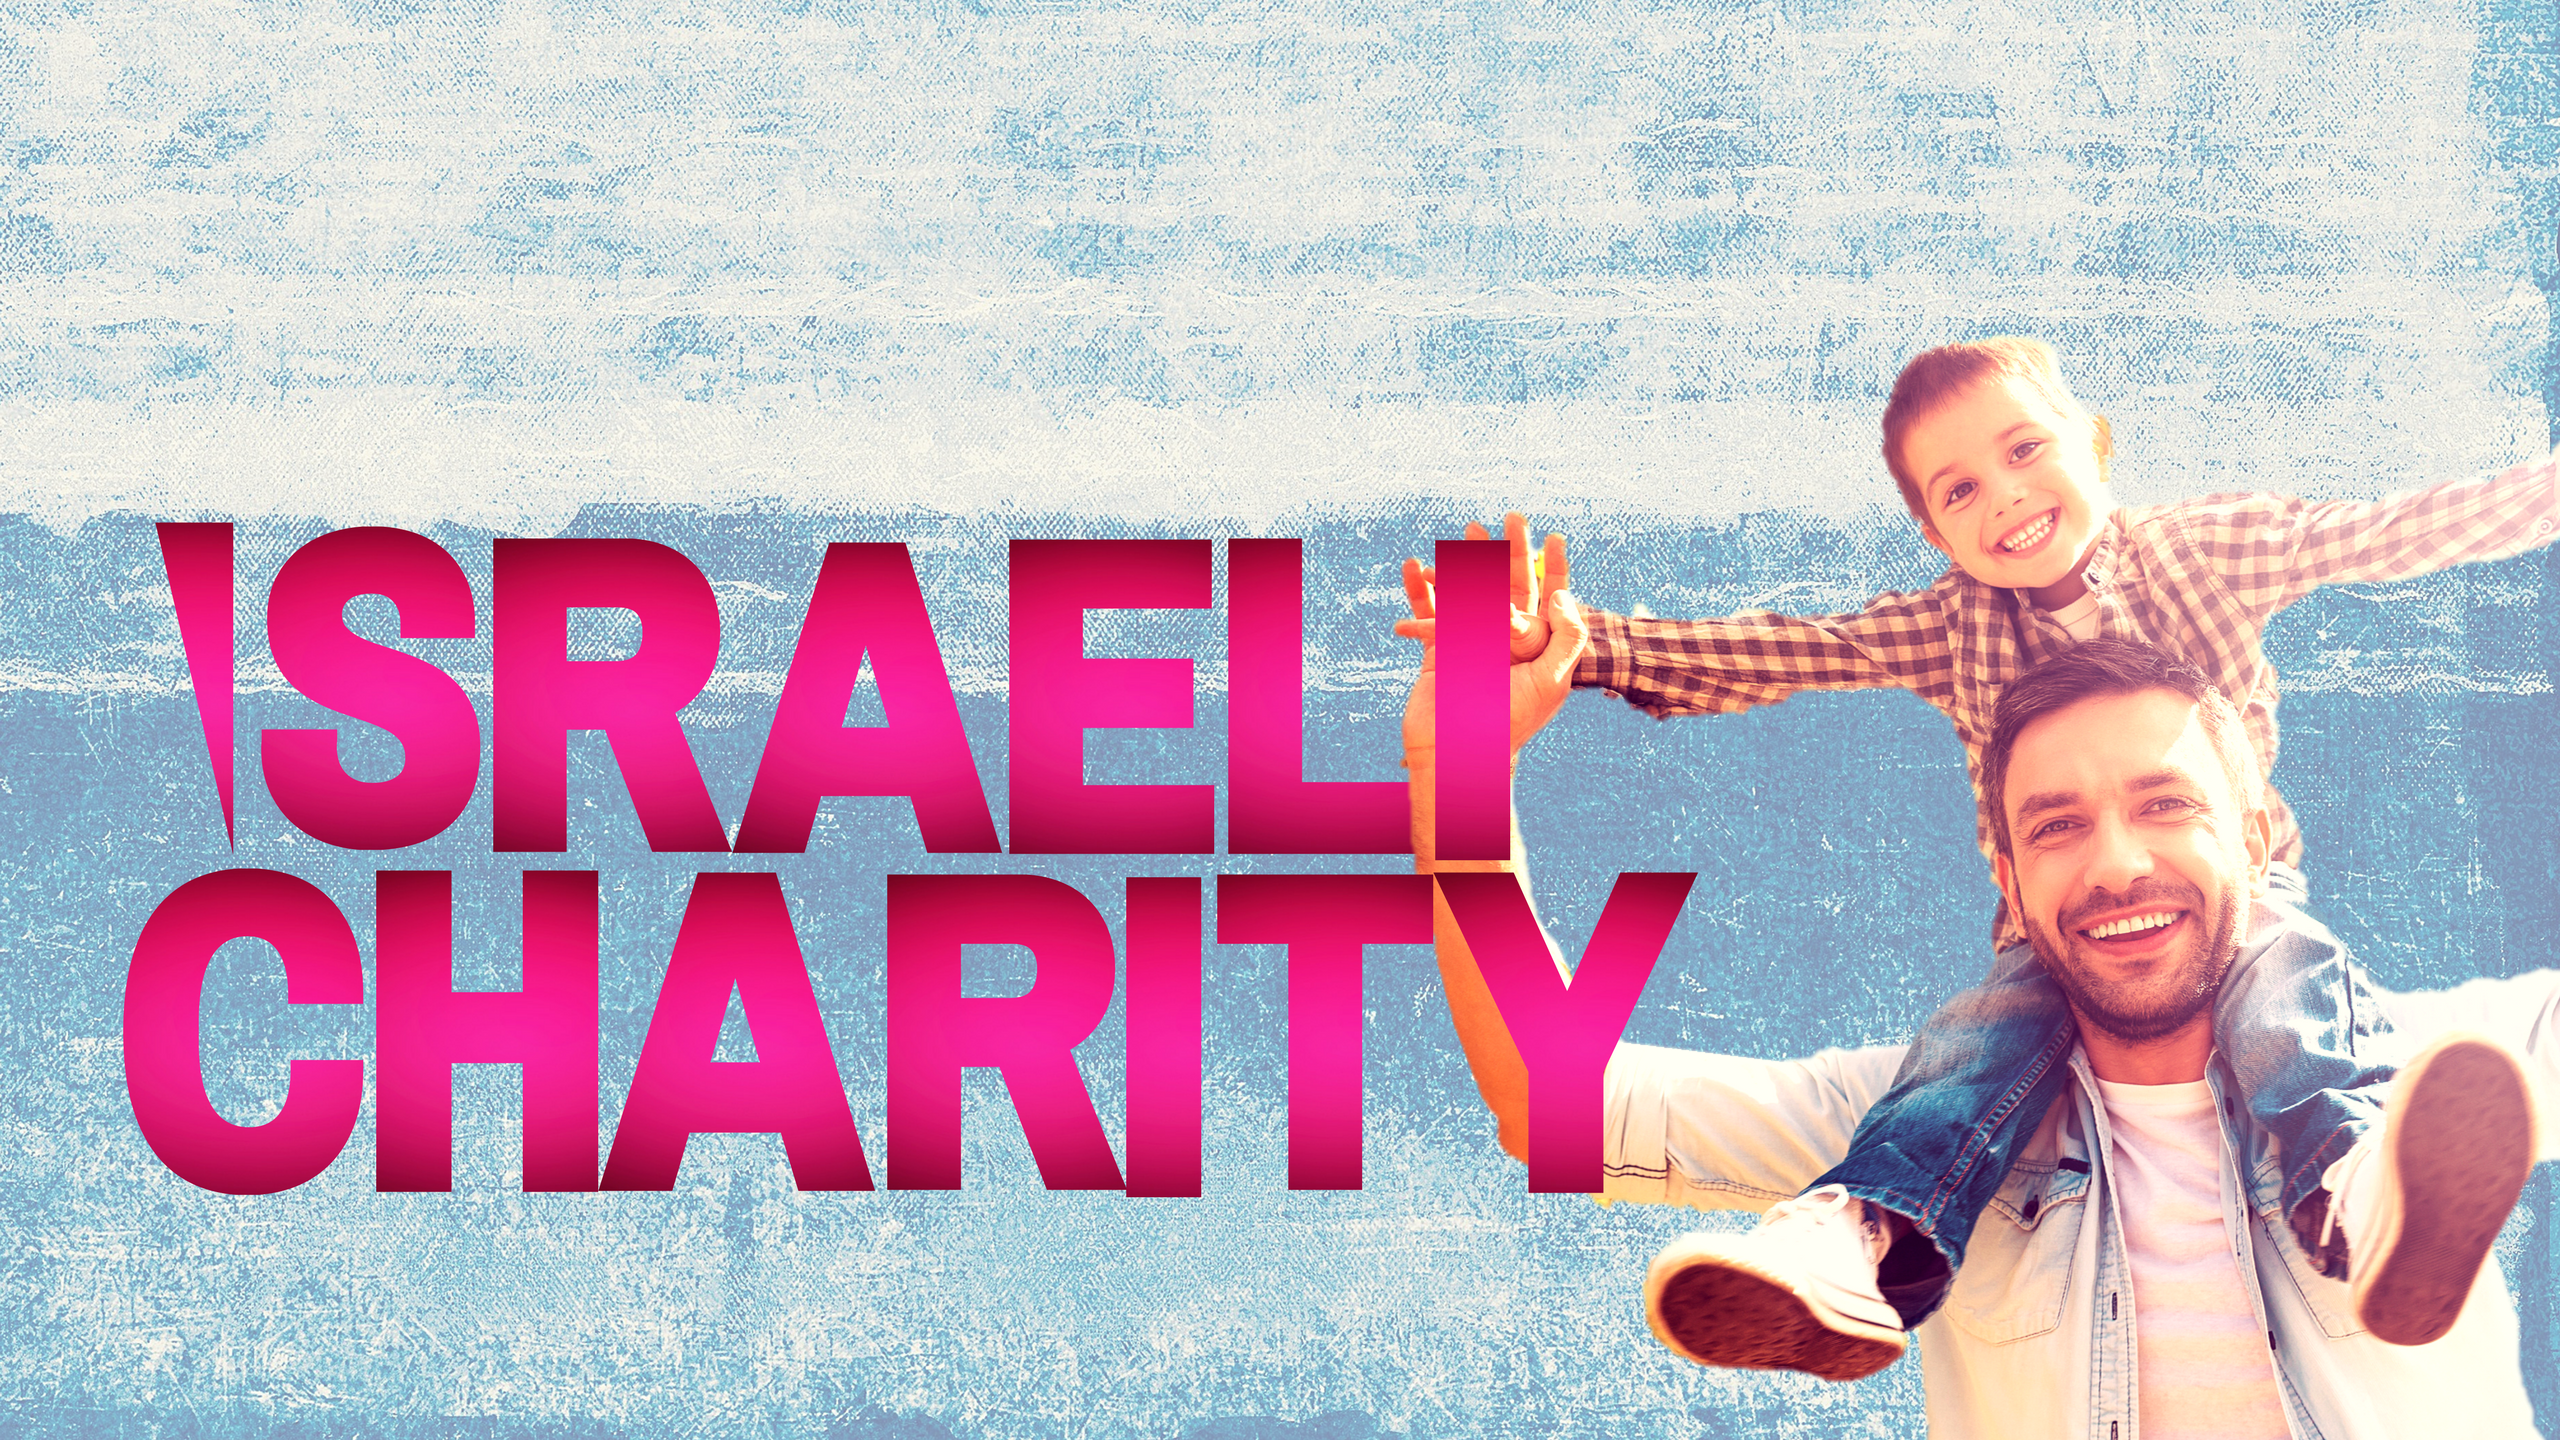 TVC: A Top Israeli Charity. Feed, Eduate &amp; Clothe the Poor